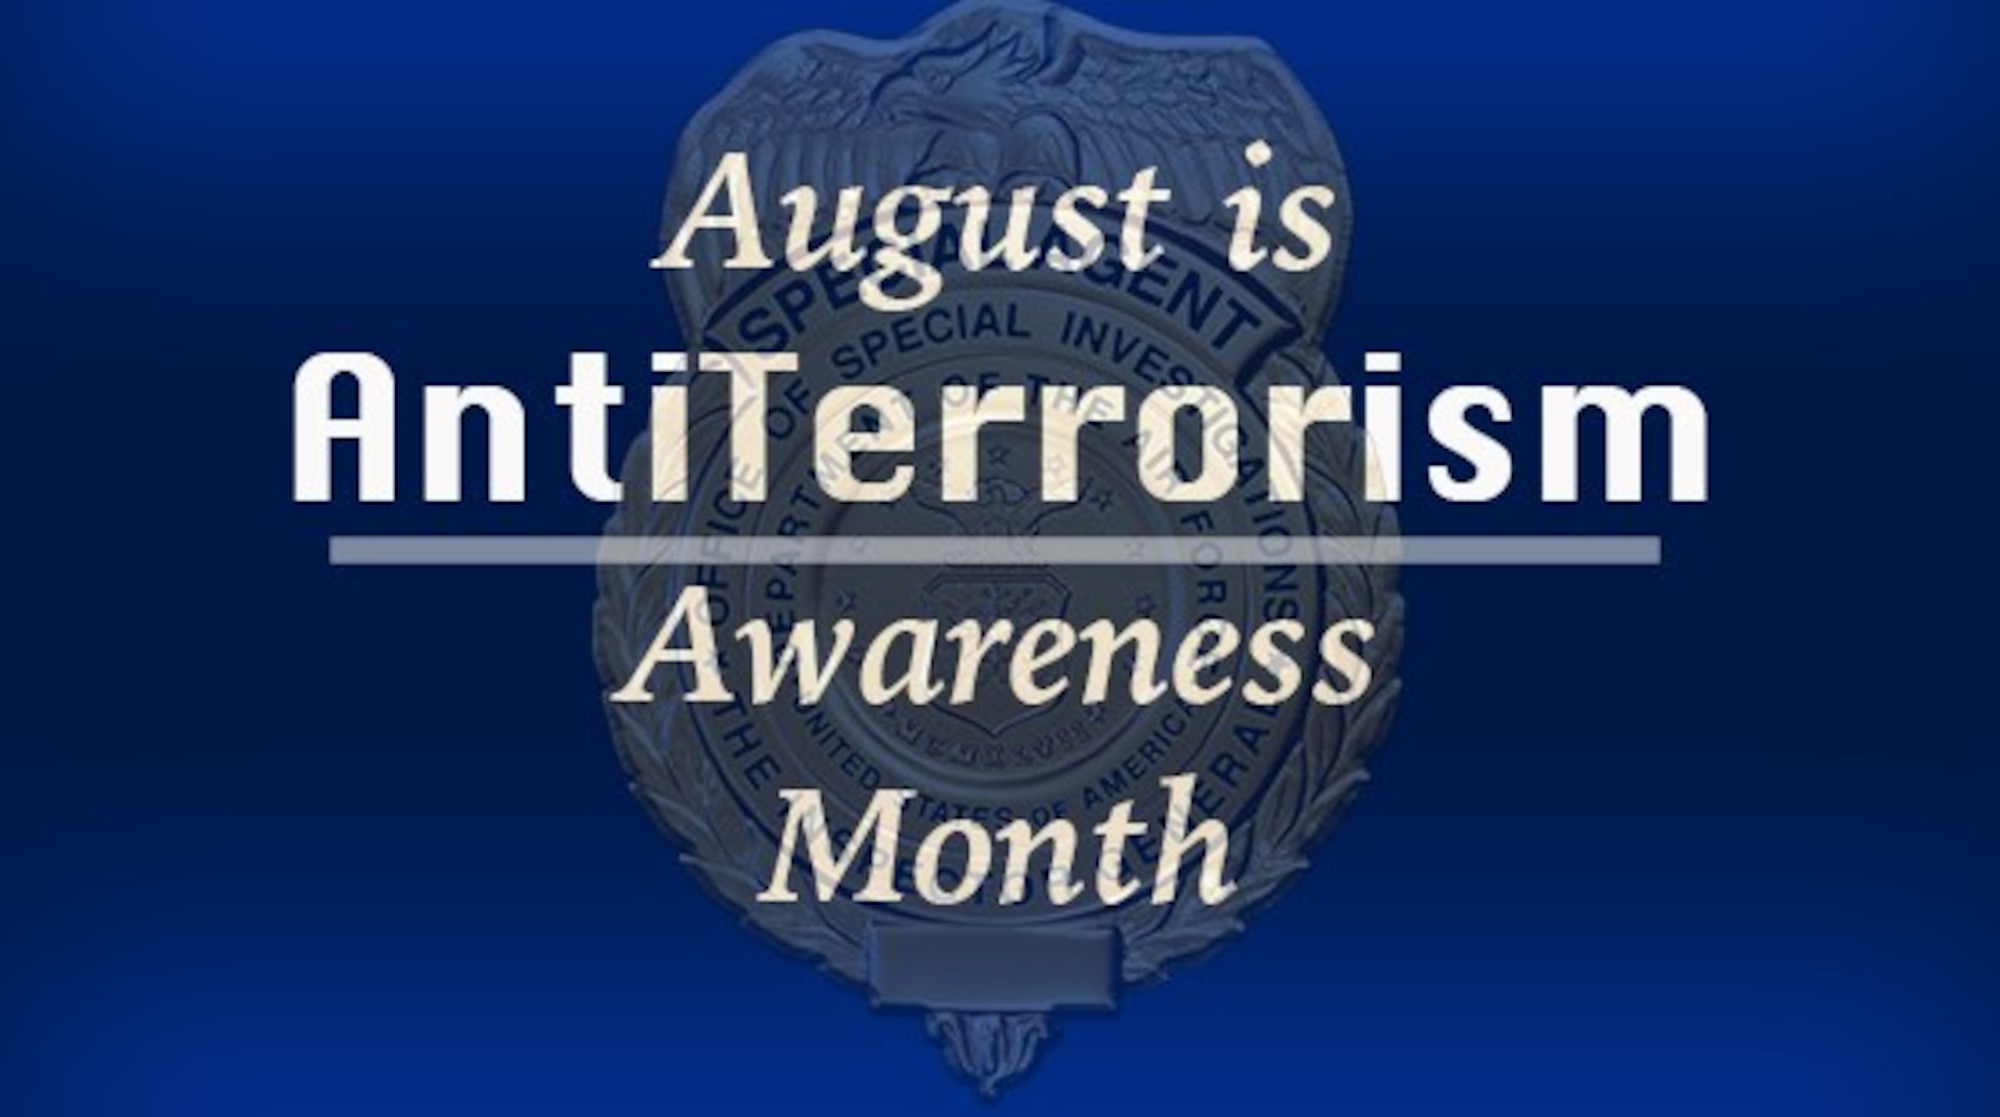 “This month, we join our brothers and sisters across the DoD in remembering to stay vigilant against terrorism threats,” wrote OSI Vice Commander, Col. Shan B. Nuckols in his message to the Command.  “This month reminds each of us to continue practicing the motto of our Eagle Eyes program: Watch, Report, Protect.” (OSI graphic by Maj. Jennifer Womble, OSI/PA)